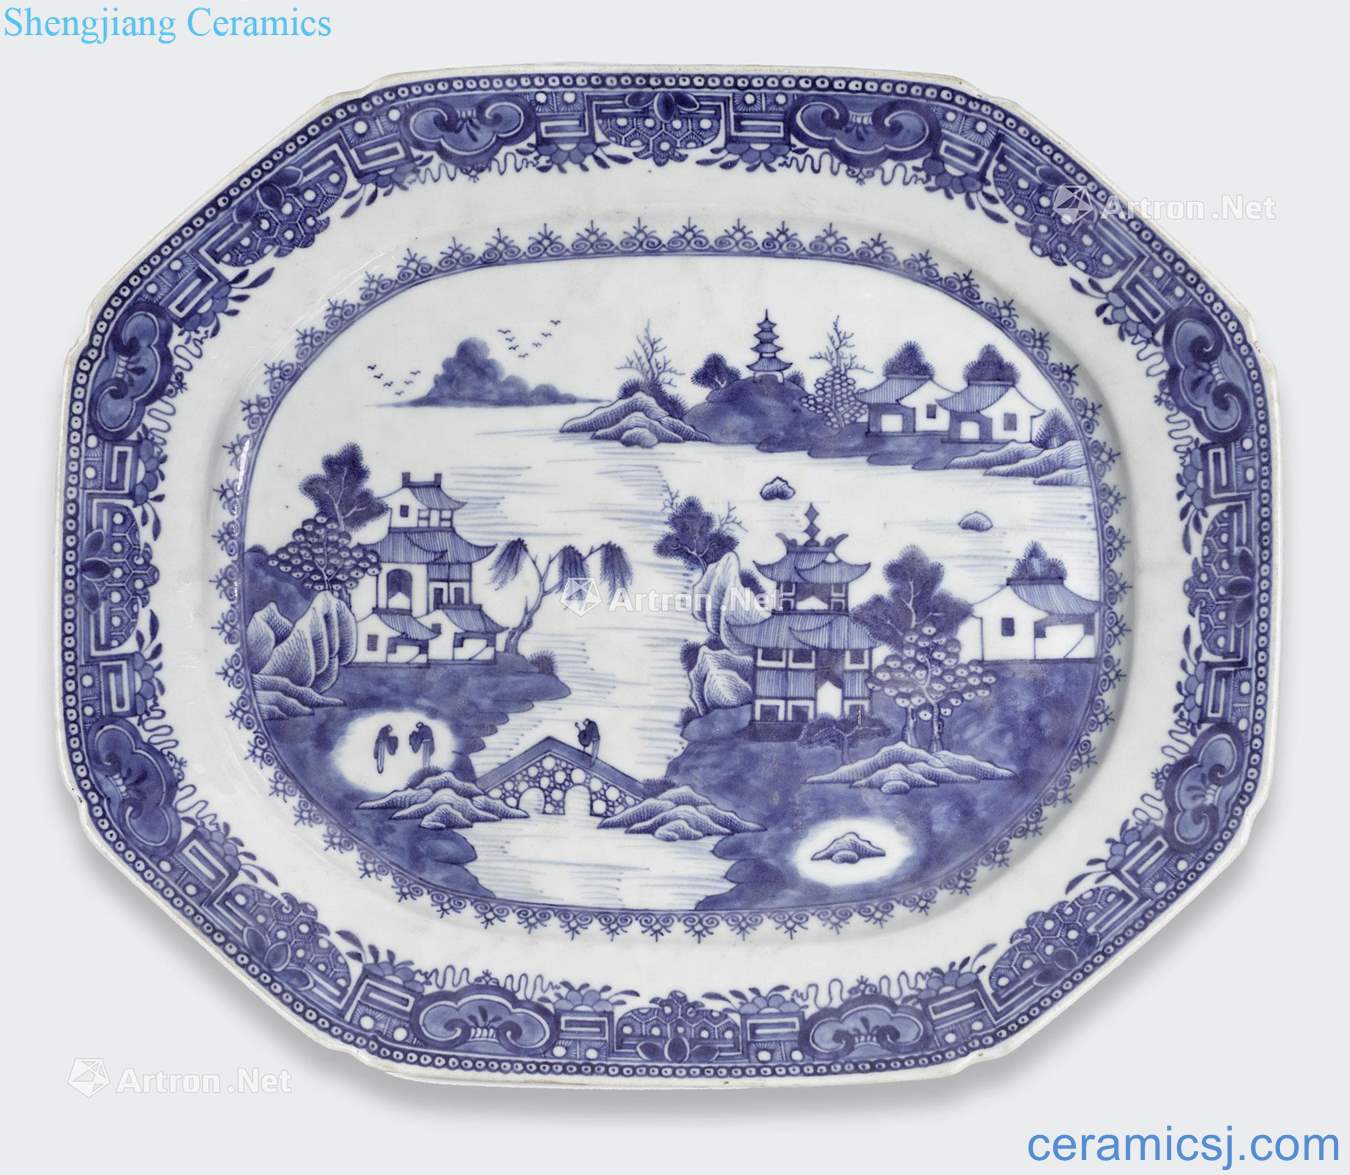 Circa 1800 A CANTON BLUE AND WHITE EXPORT PORCELAIN OCTAGONAL UNDER the DISH